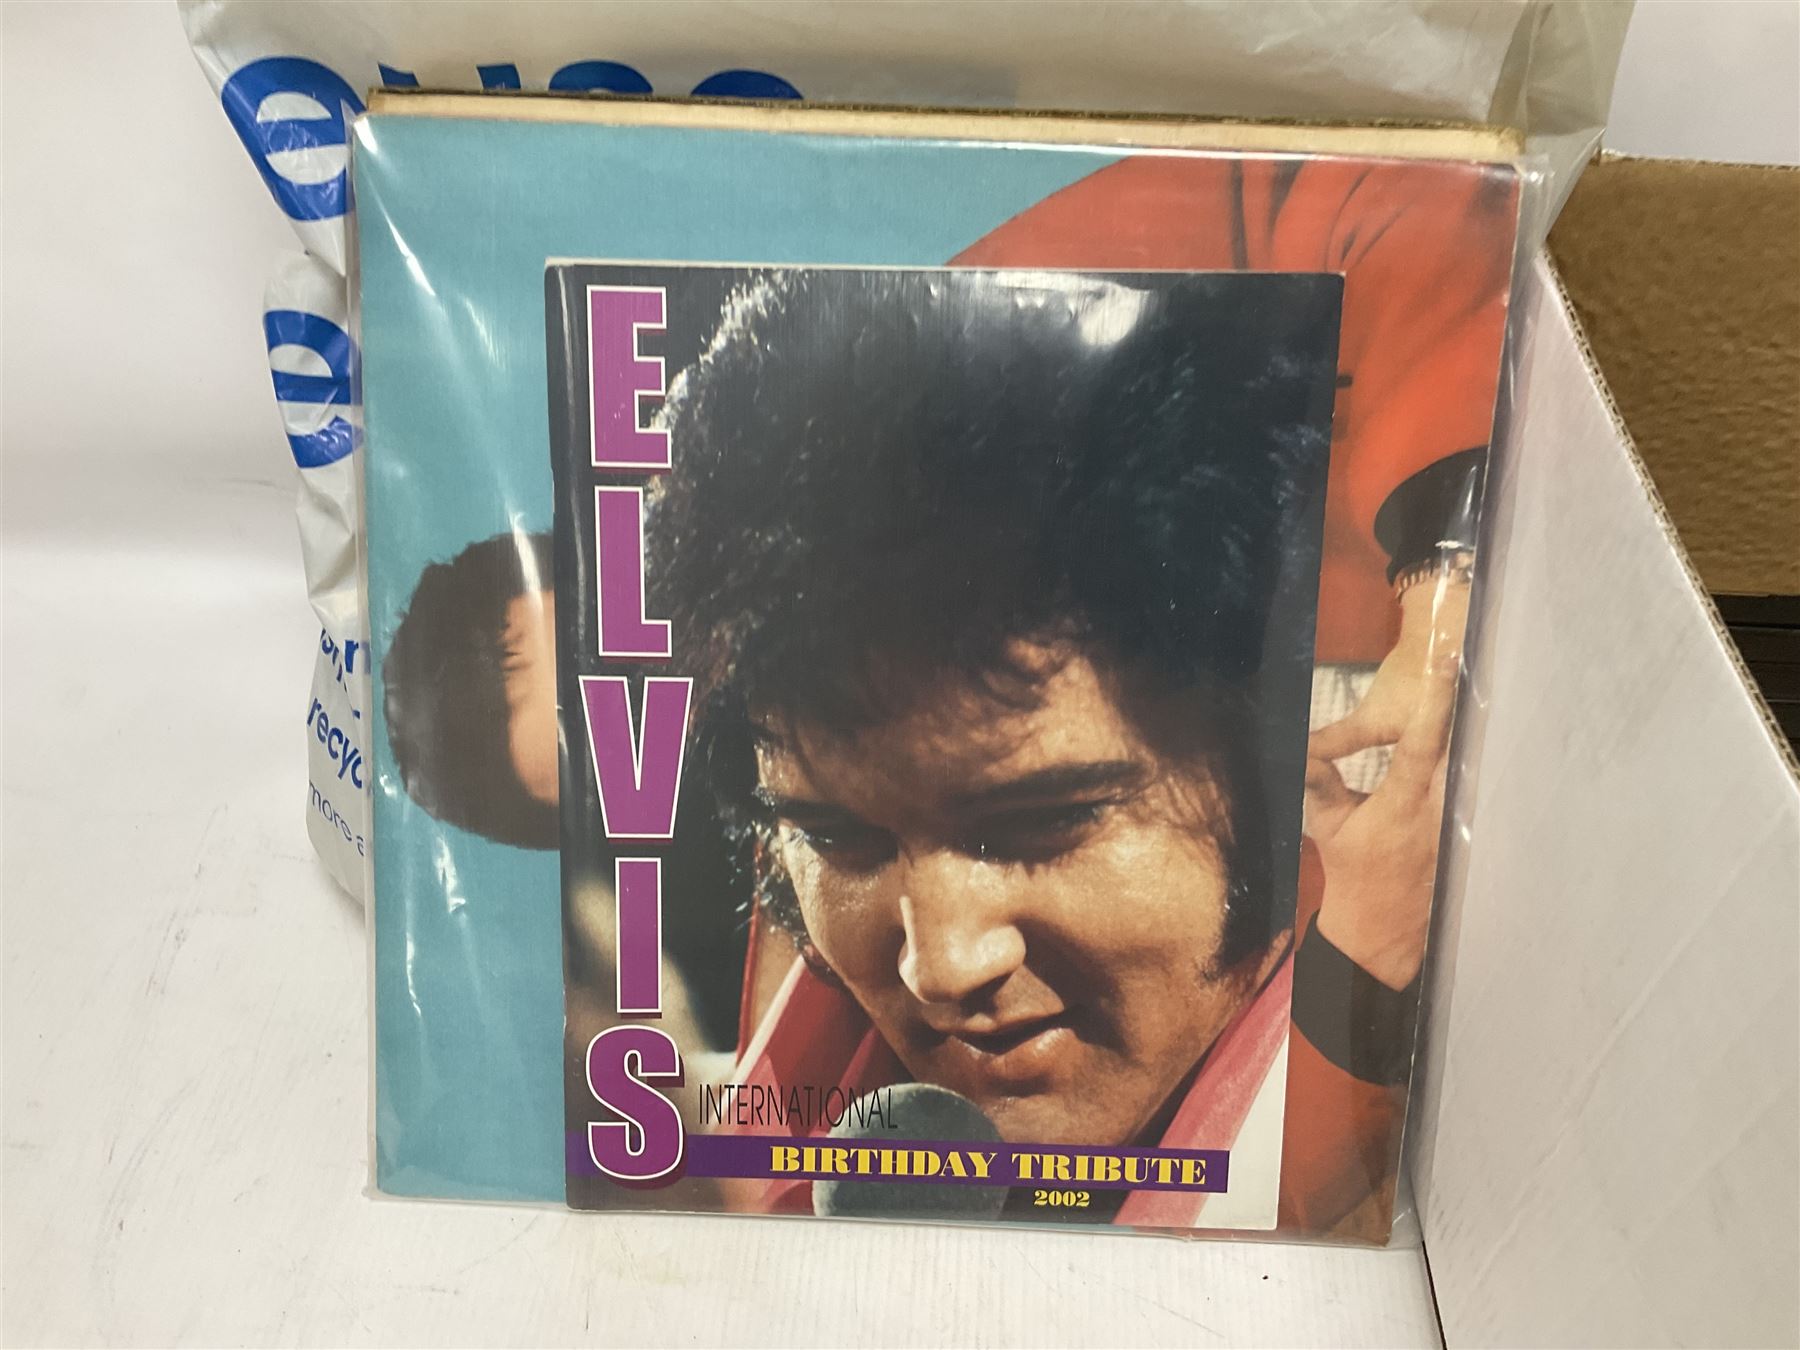 Thirty-one LP records including Everly brothers - Bild 6 aus 9